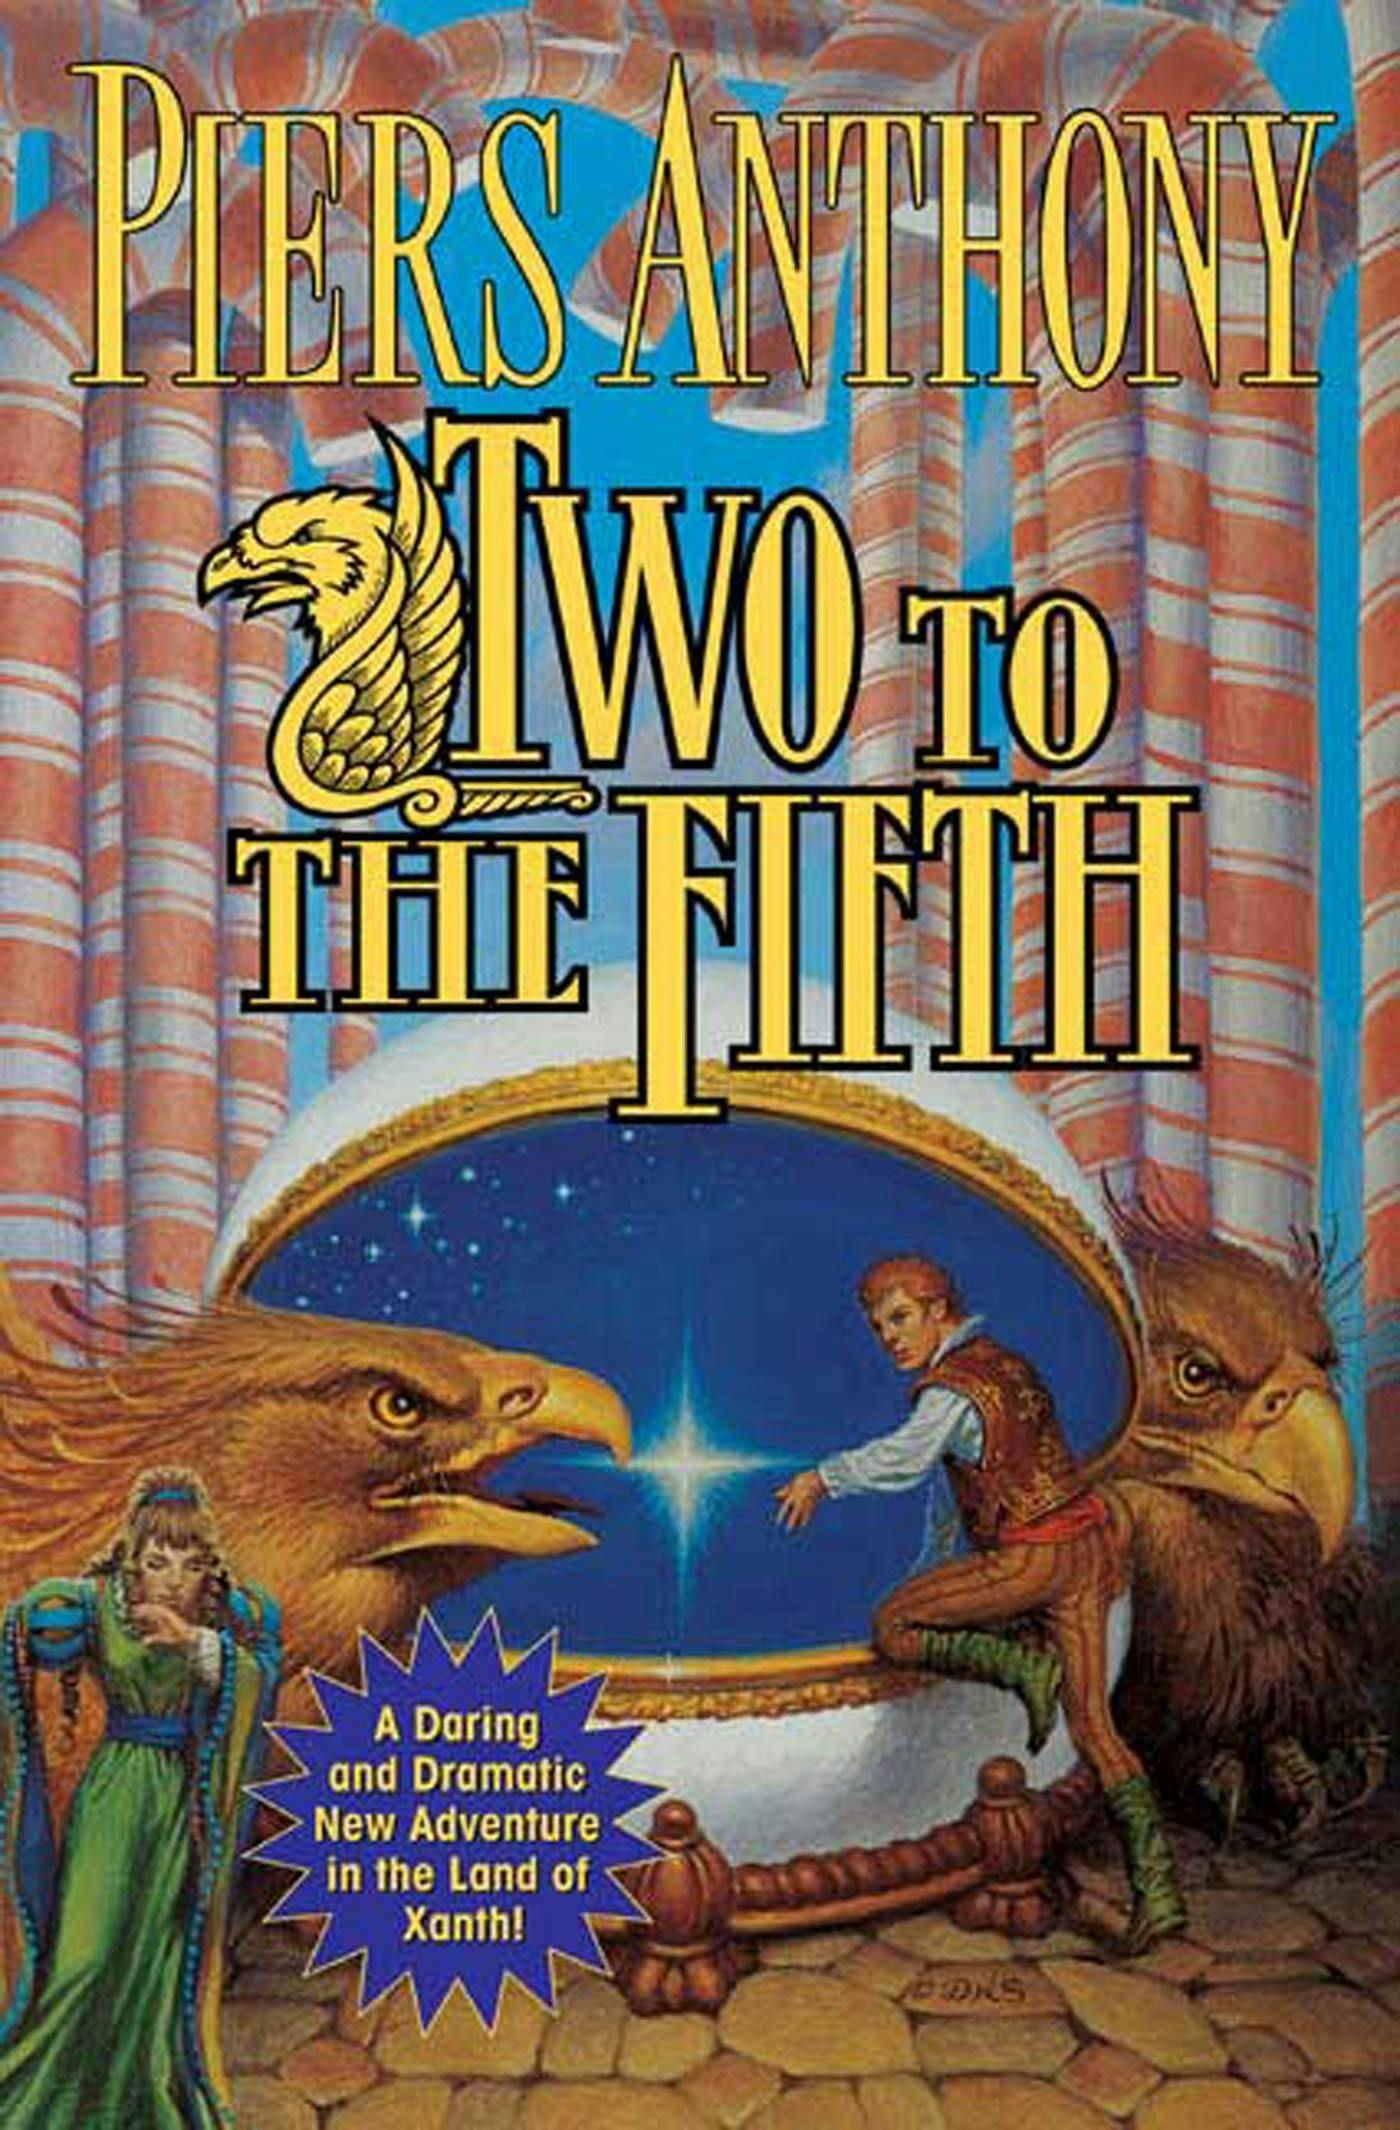 Cover for the book titled as: Two to the Fifth